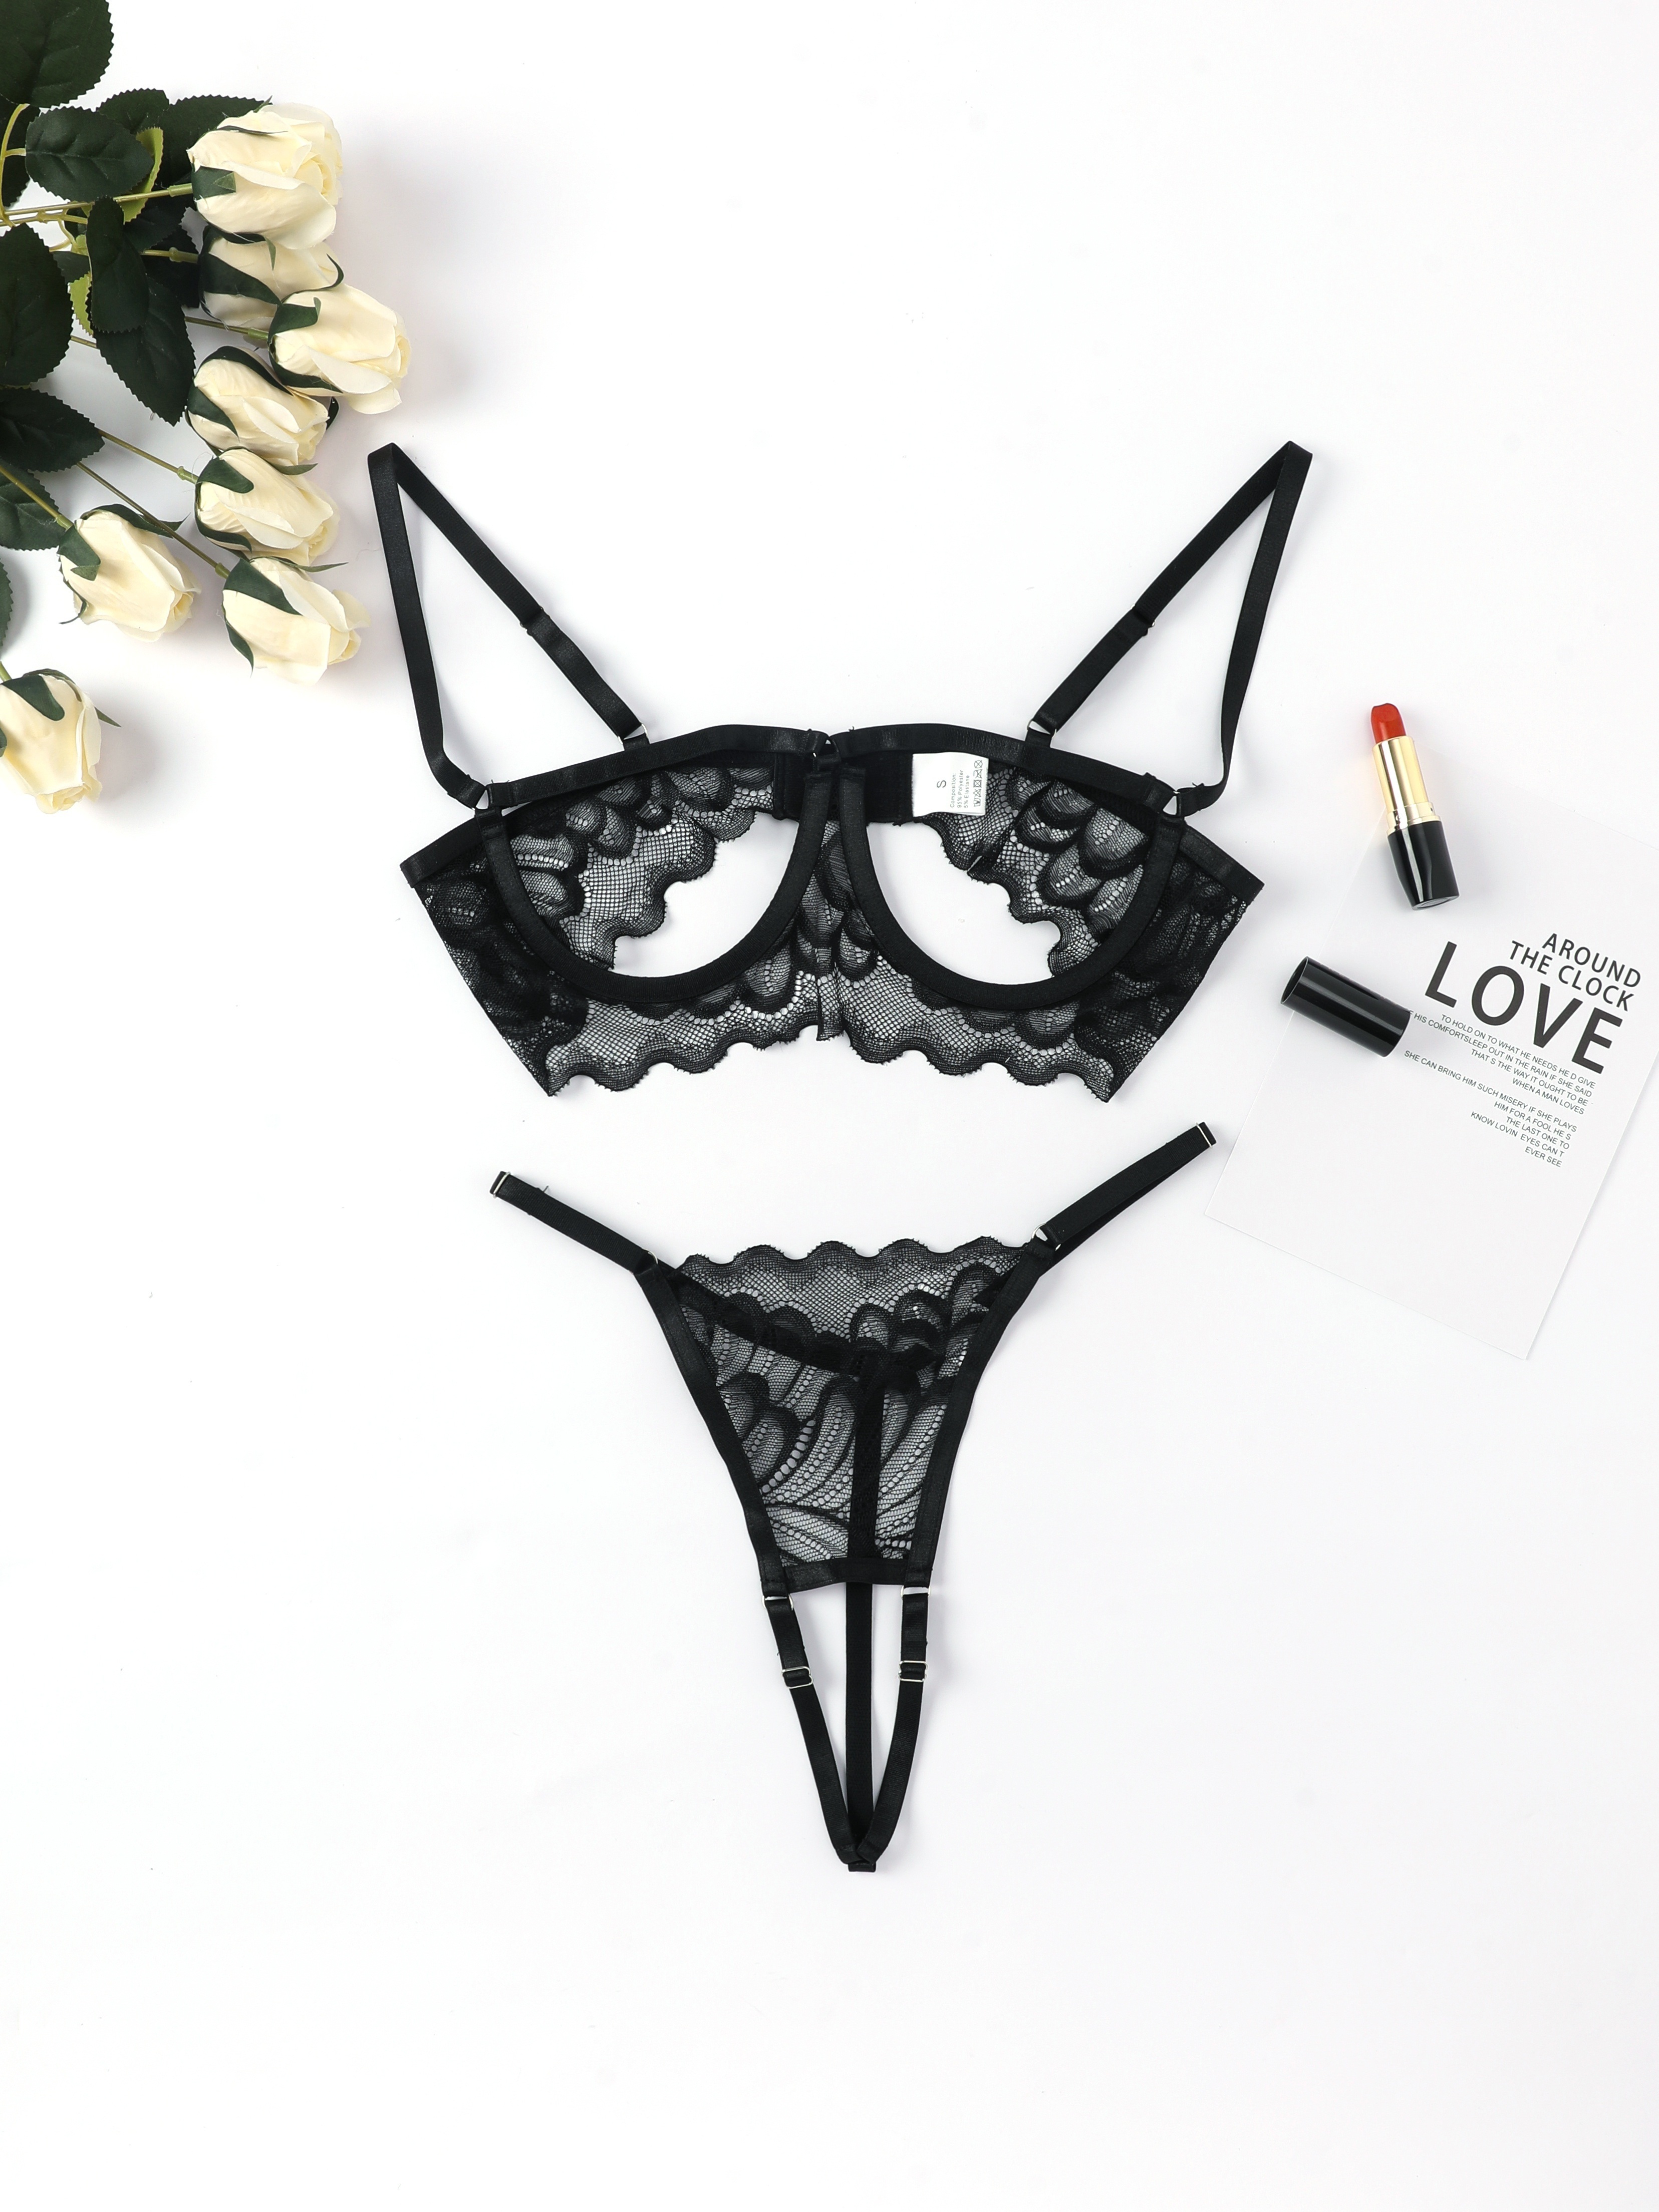 Women's Sexy Black Lace Bralette For Full Bust